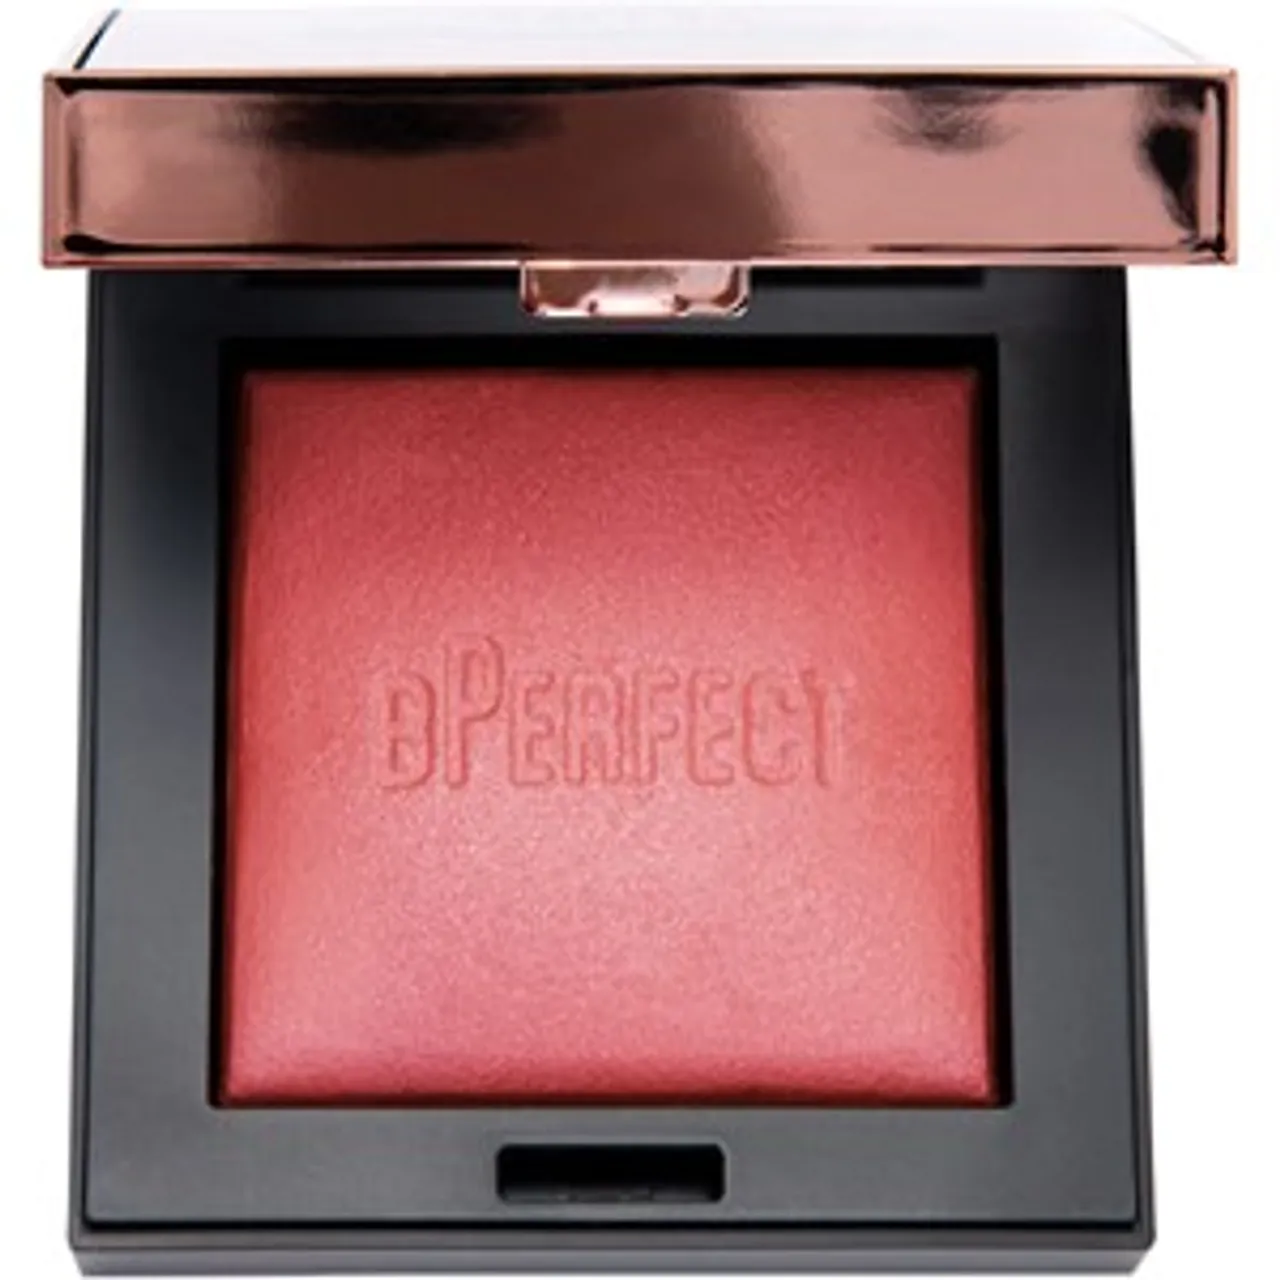 BPERFECT Scorched Blusher 2 13 g